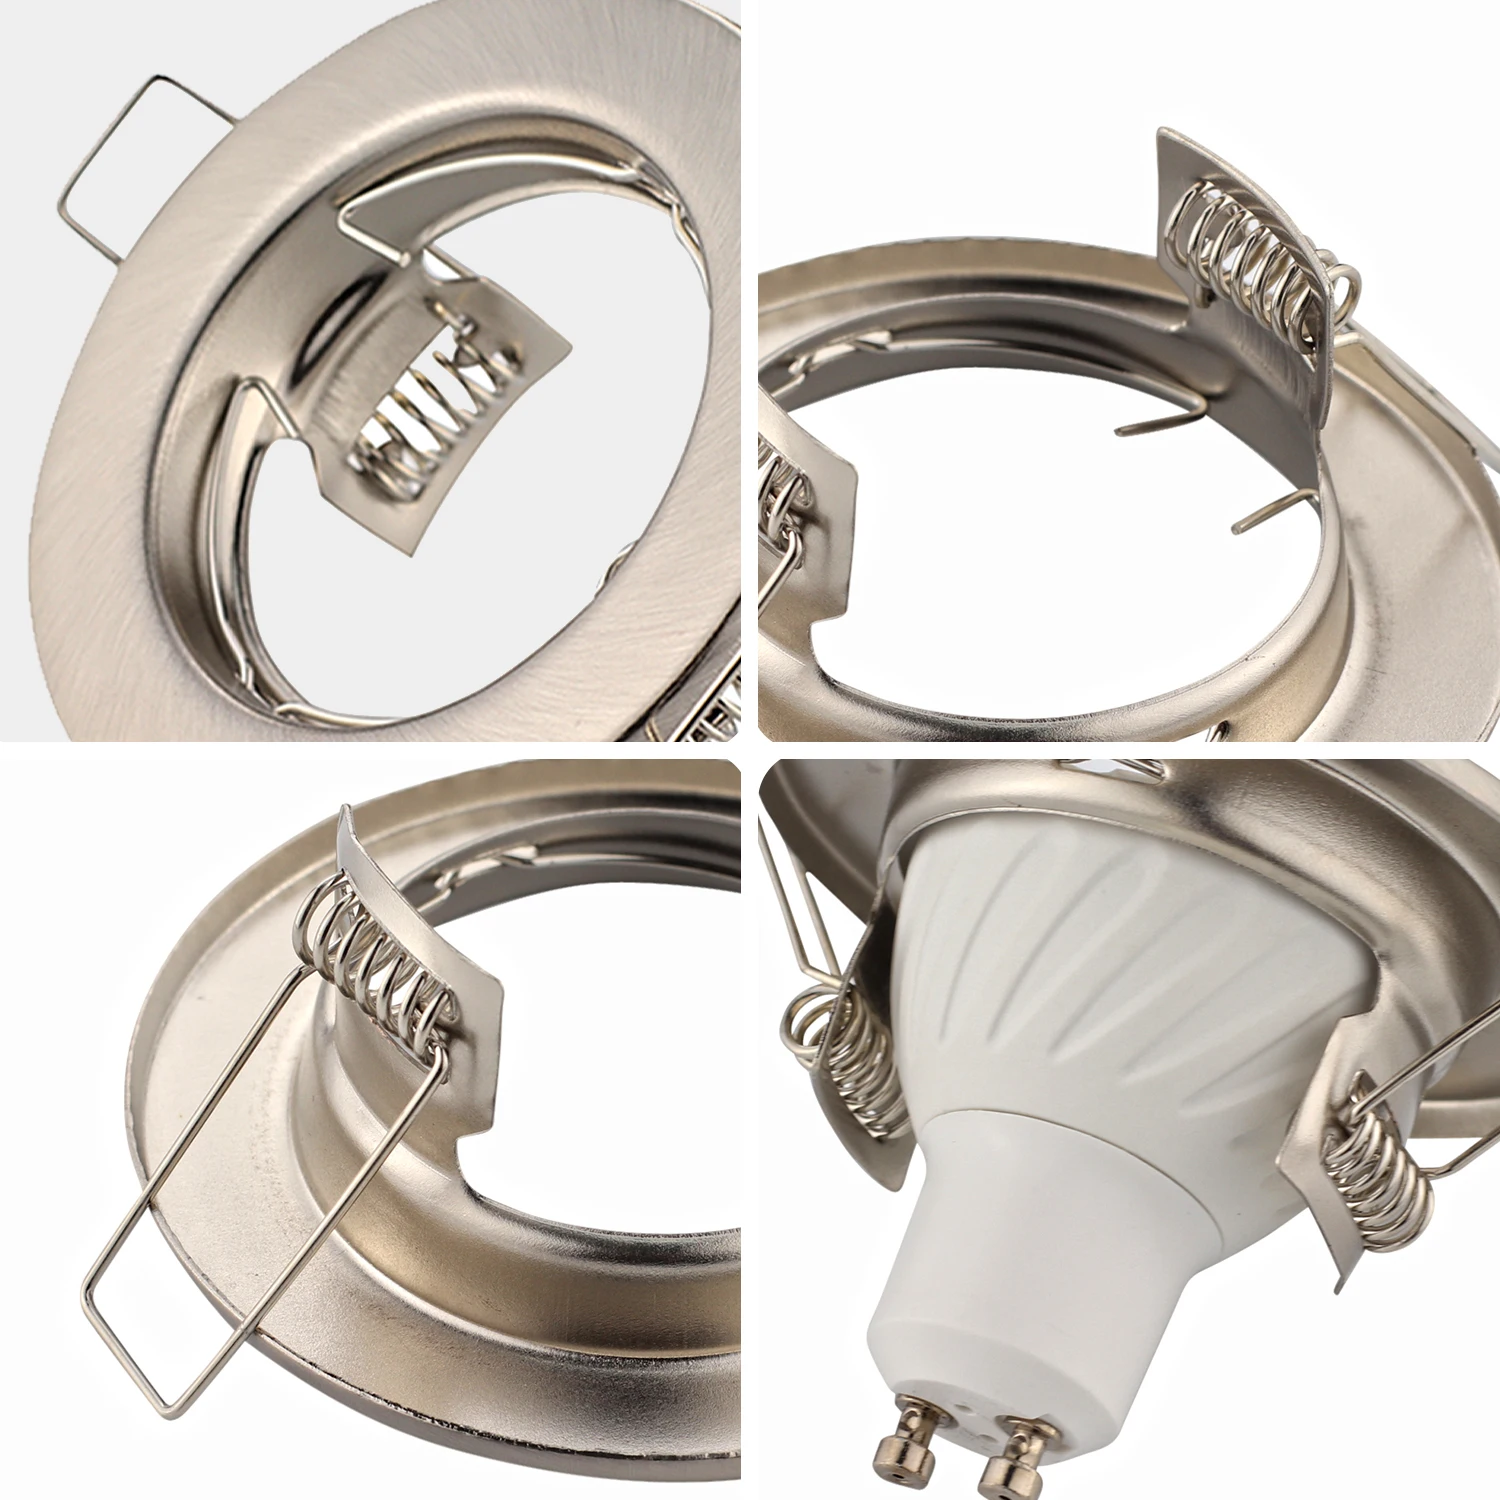 How to Replace an LED Ceiling Light Bulb: A Step-by-Step Guide插图3